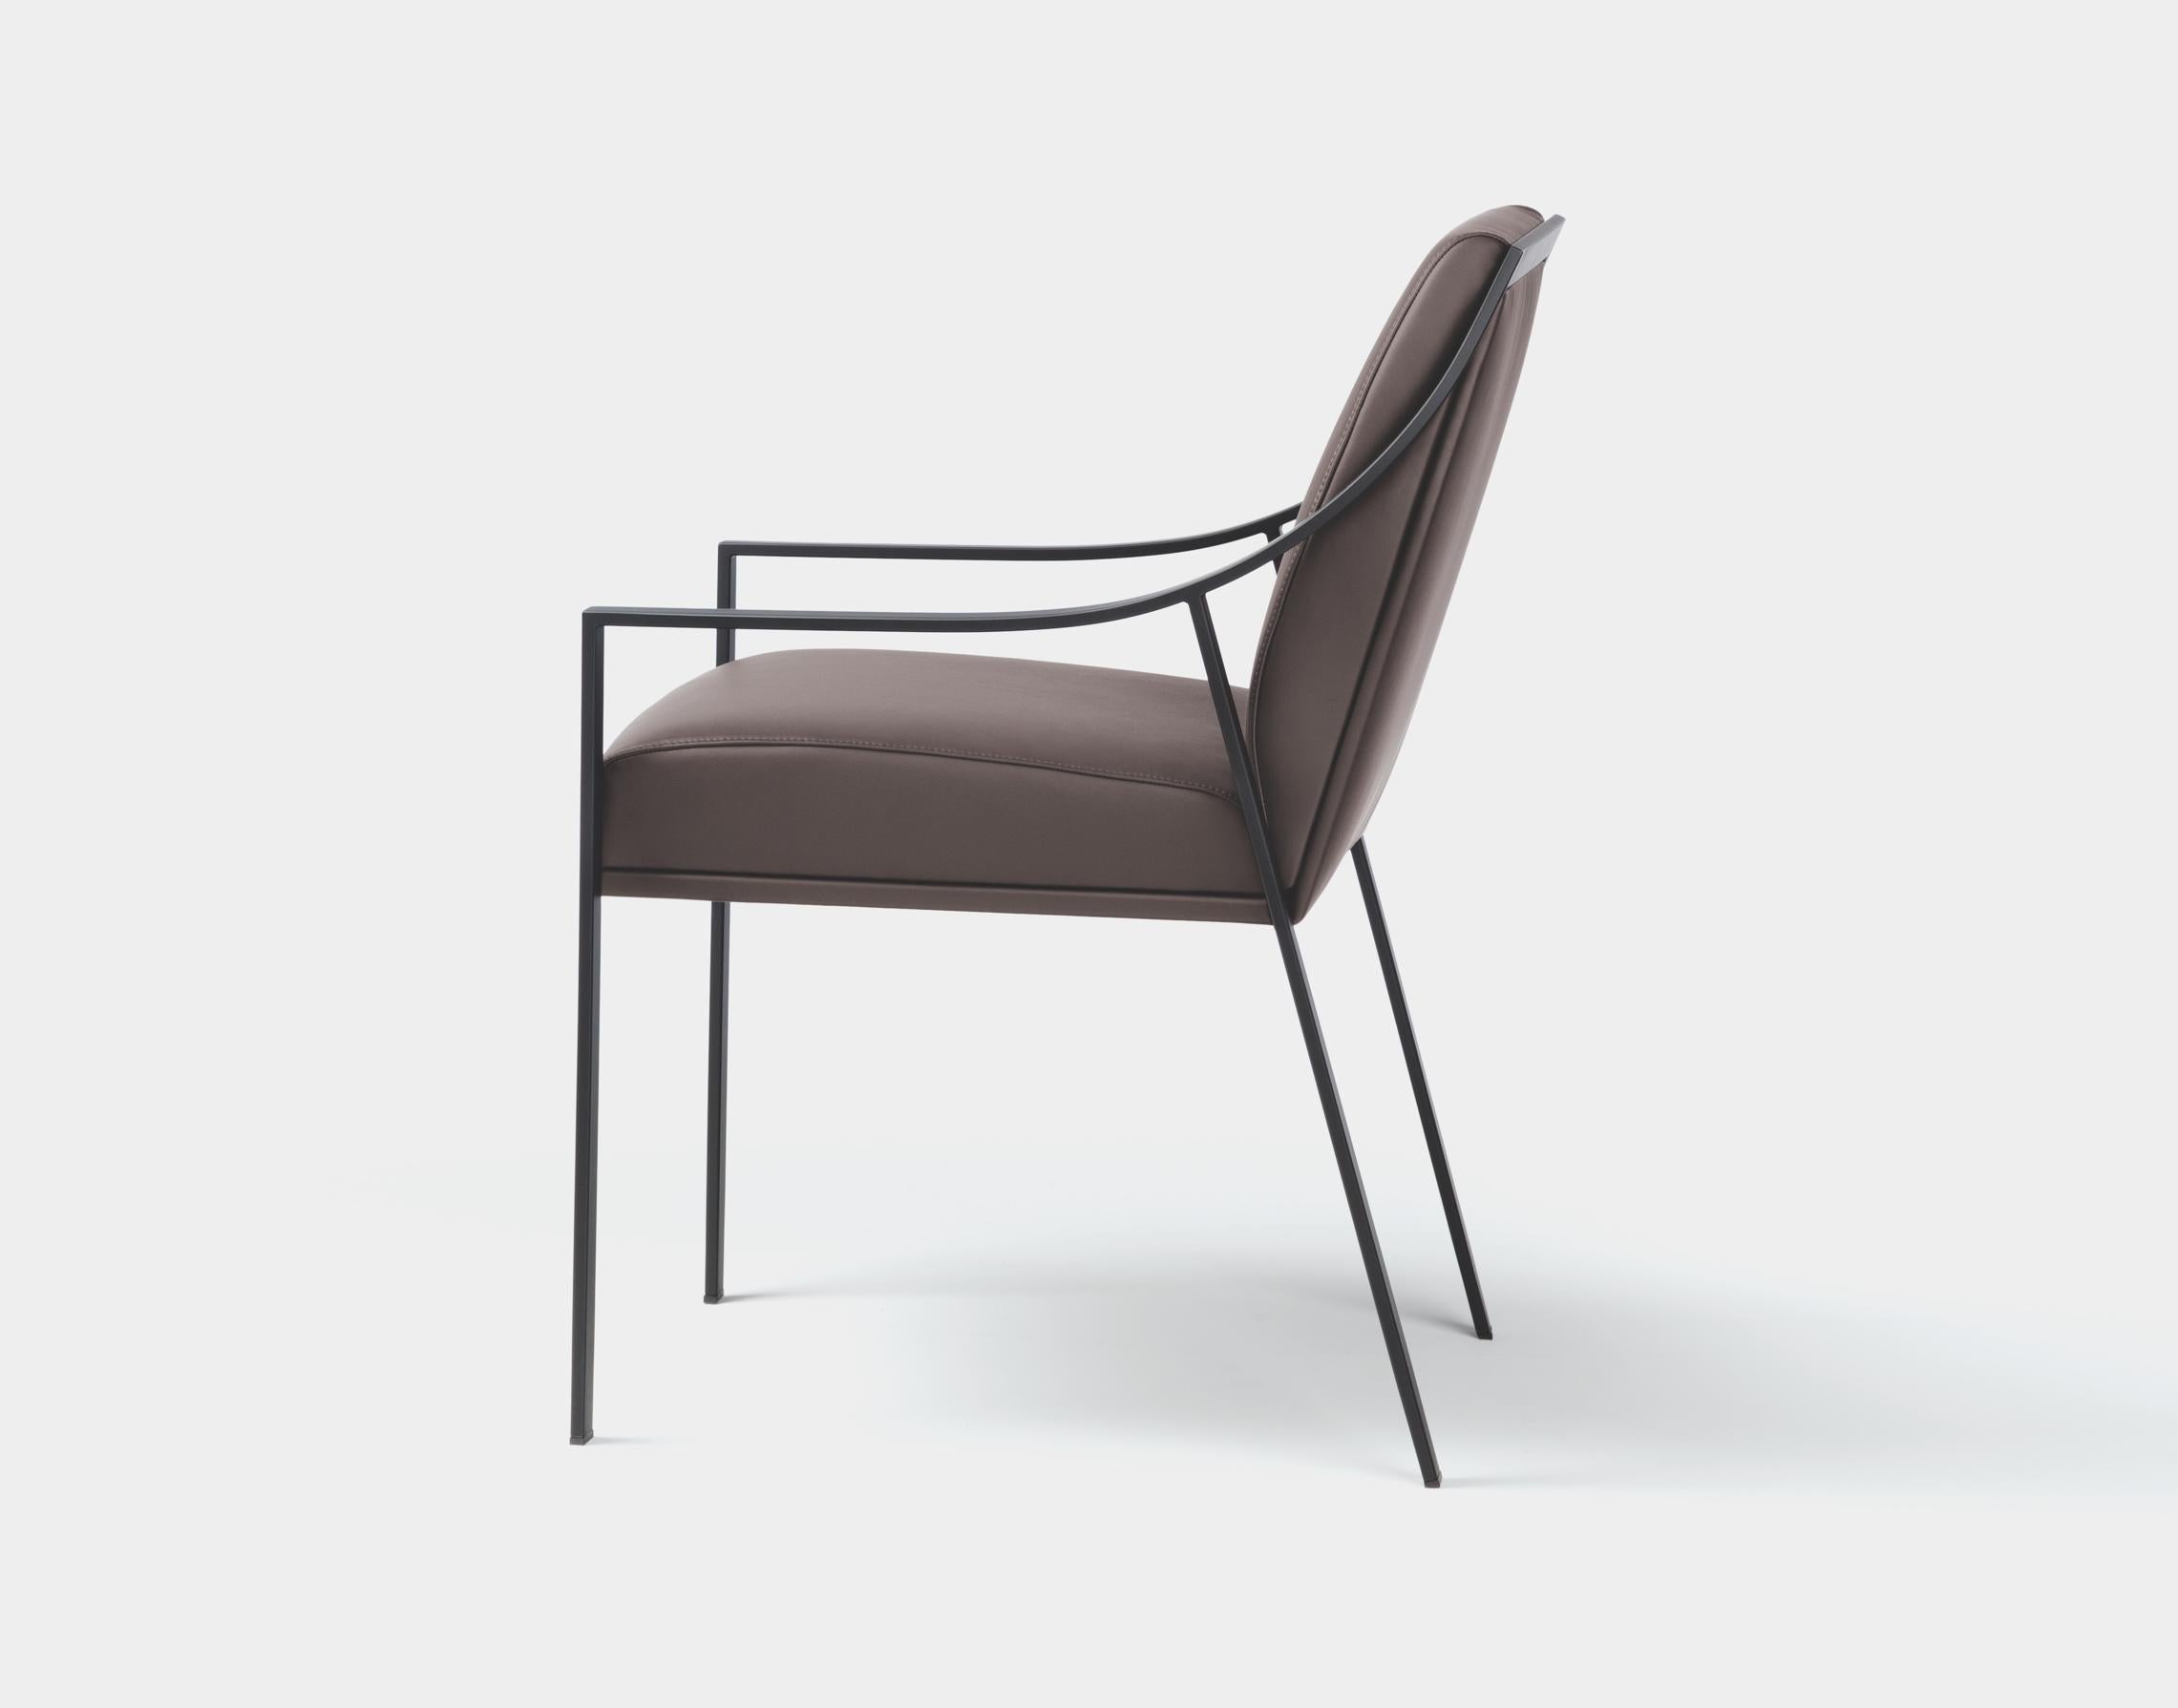 Holly Hunt Aileron black dining arm chair with leather seat by Christophe Pillet

Additional Information:
Material: Metal, upholstery
Frame: Metal
Frame finish: Matte Black Lacquer
Seat & back finish: 02-610 Caffe leather
Dimensions: 21.25 W